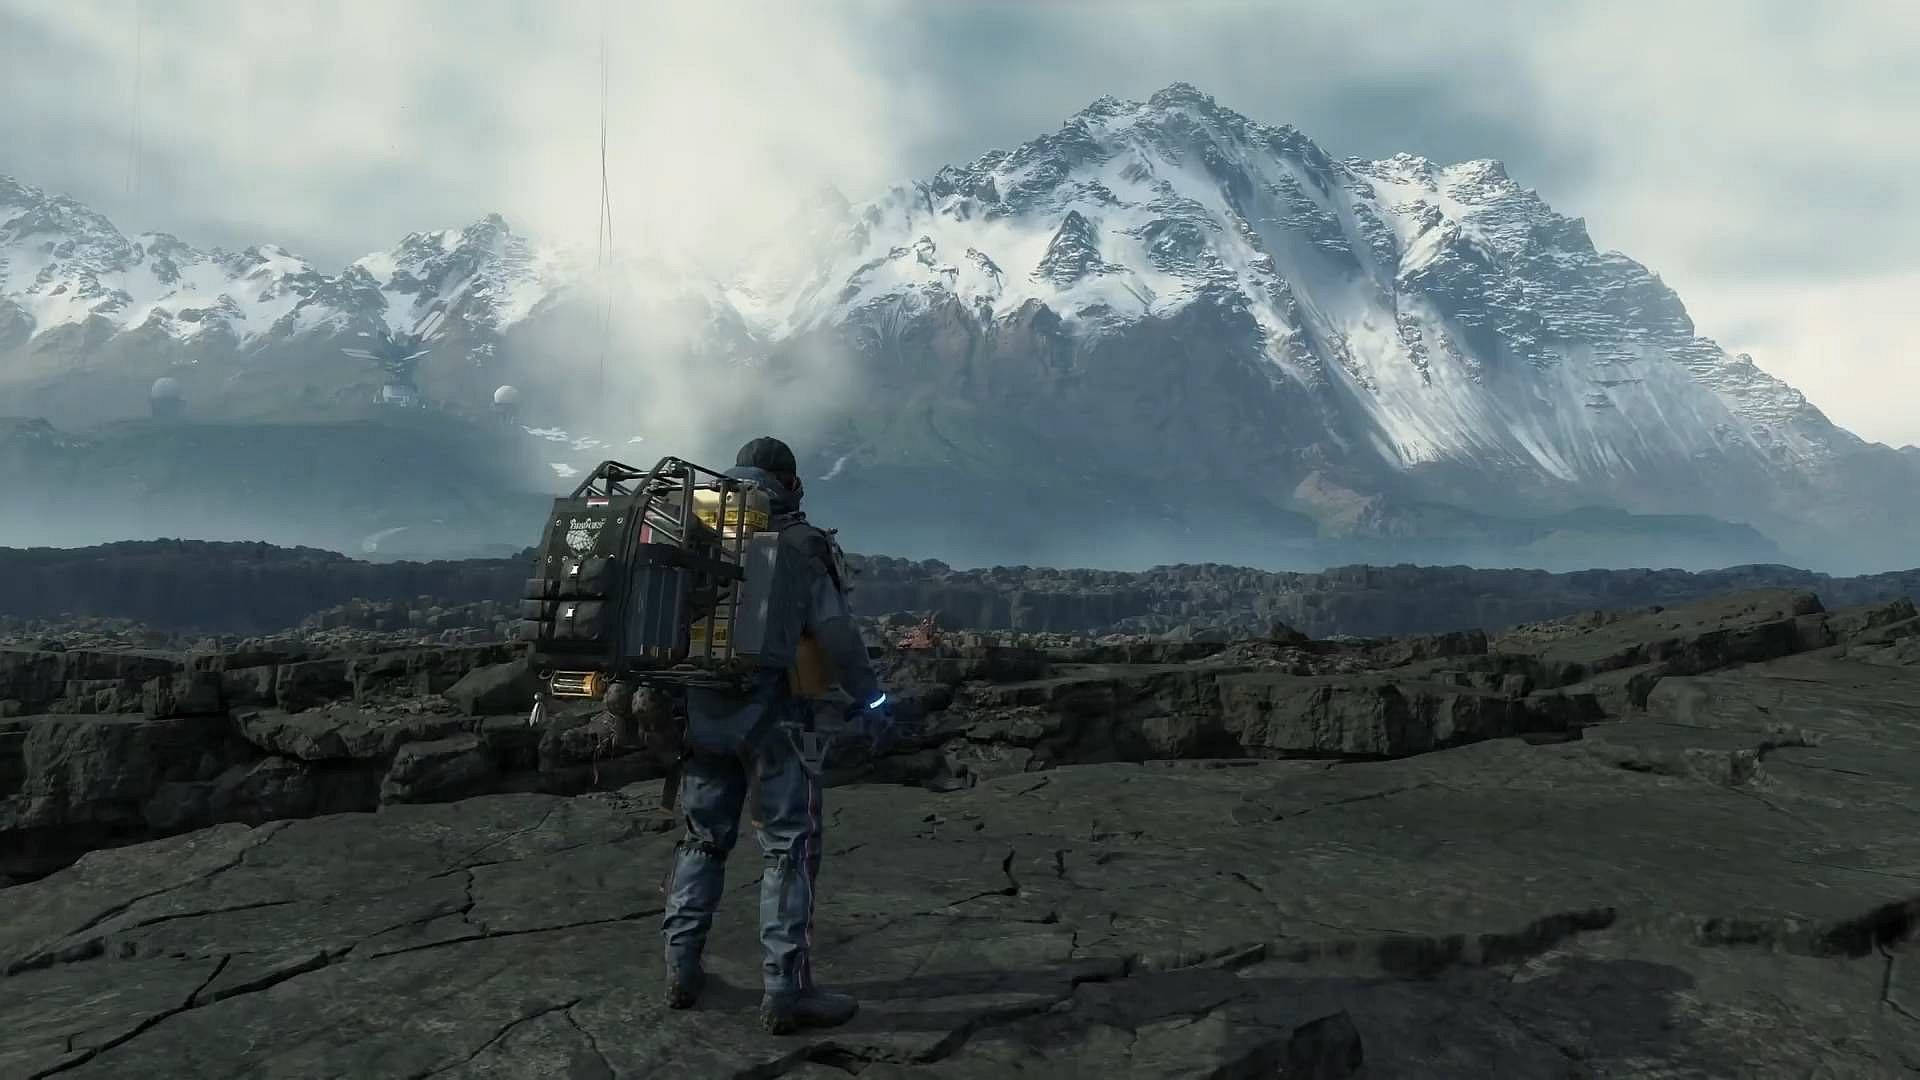 1920X1080 Death Stranding Wallpaper and Background